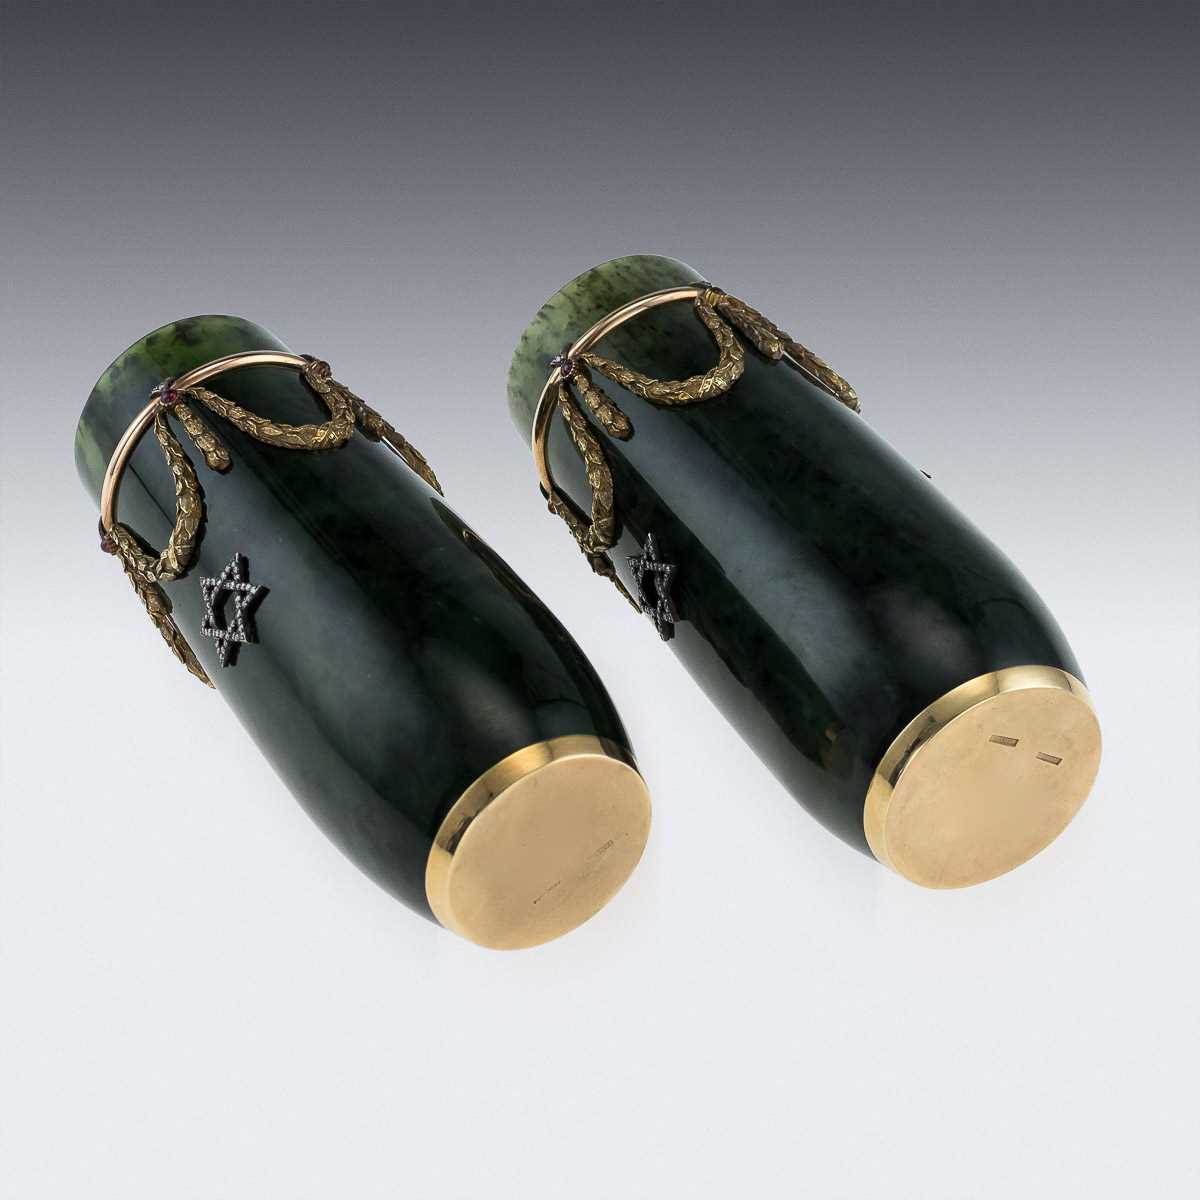 A PAIR 14CT GOLD, NEPHRITE, DIAMOND AND RUBY ENCRUSTED VASES IN THE STYLE OF FABERGE - Image 5 of 15